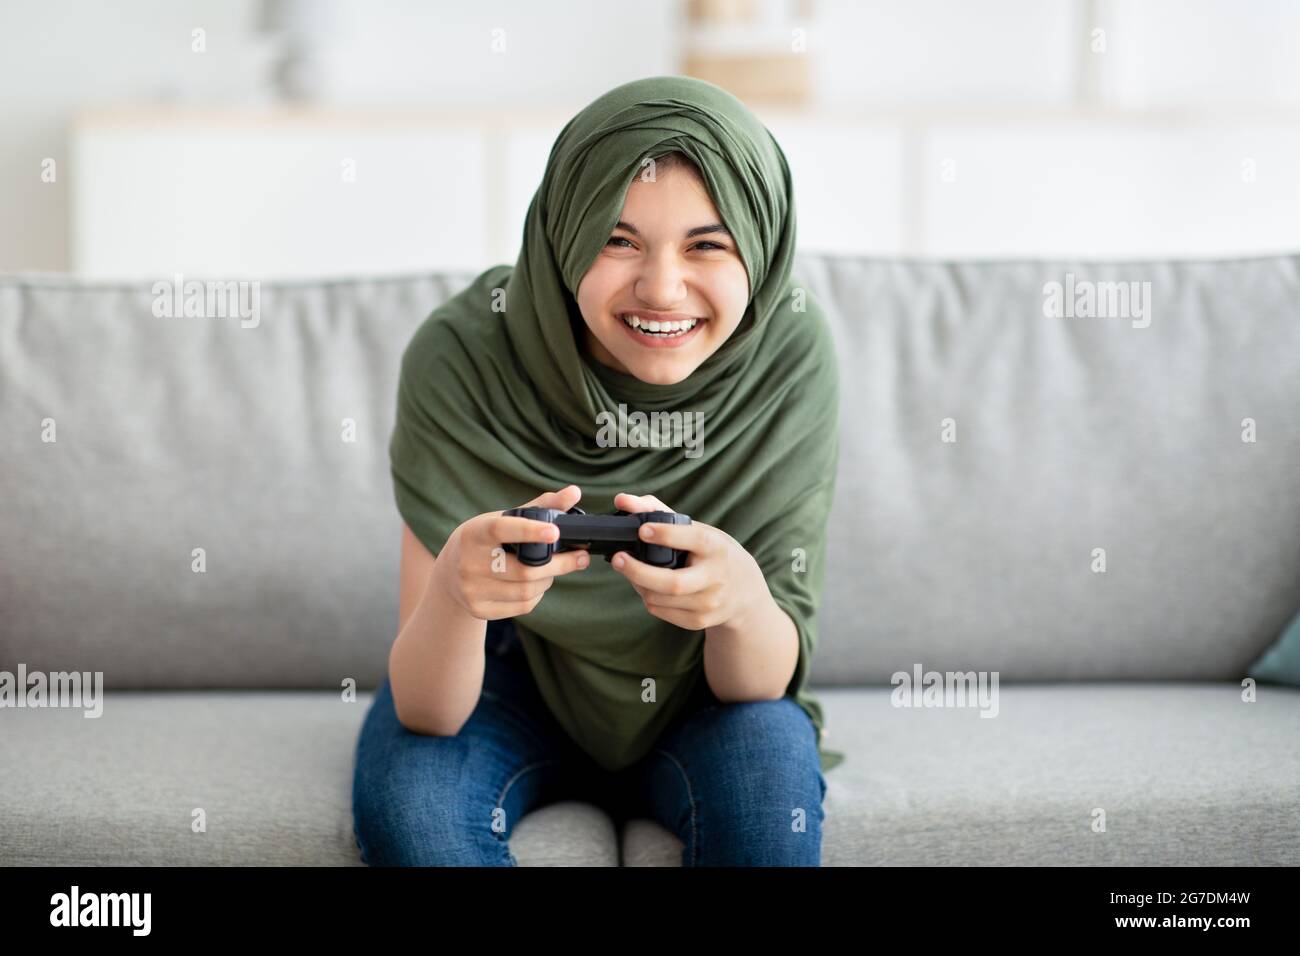 Portrait of happy teen girl in hijab holding joystick, playing videogame at home. Lockdown pastimes and hobbies Stock Photo